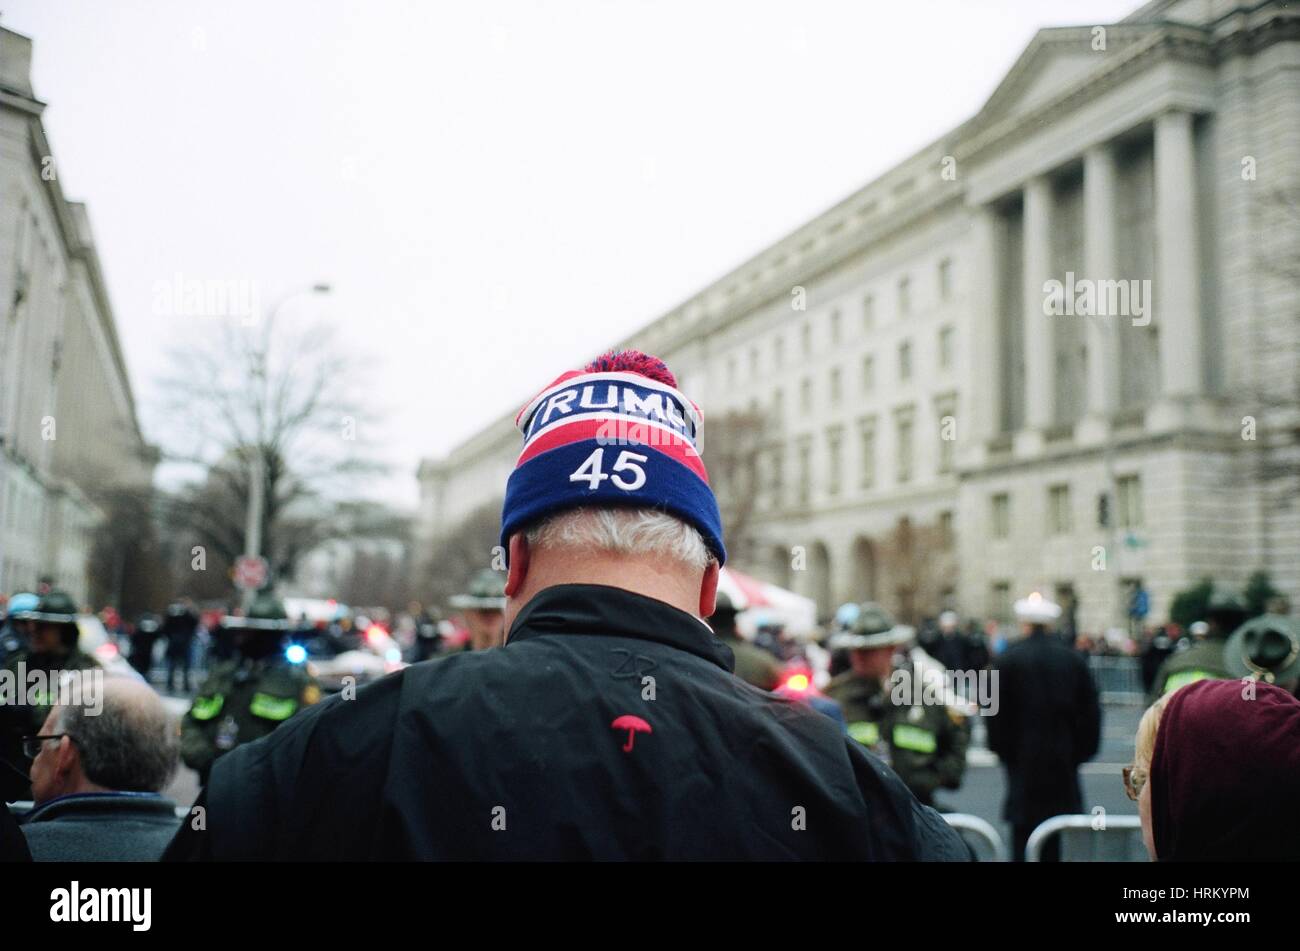 Trump supporters wait on Pennsylvania Avenue for Trump's motorcade to pass  Scenes from Washington D.C. along Pennsylvania Avenue after Donald J. Trump's inauguration as the 45th President of the United States of America. Stock Photo